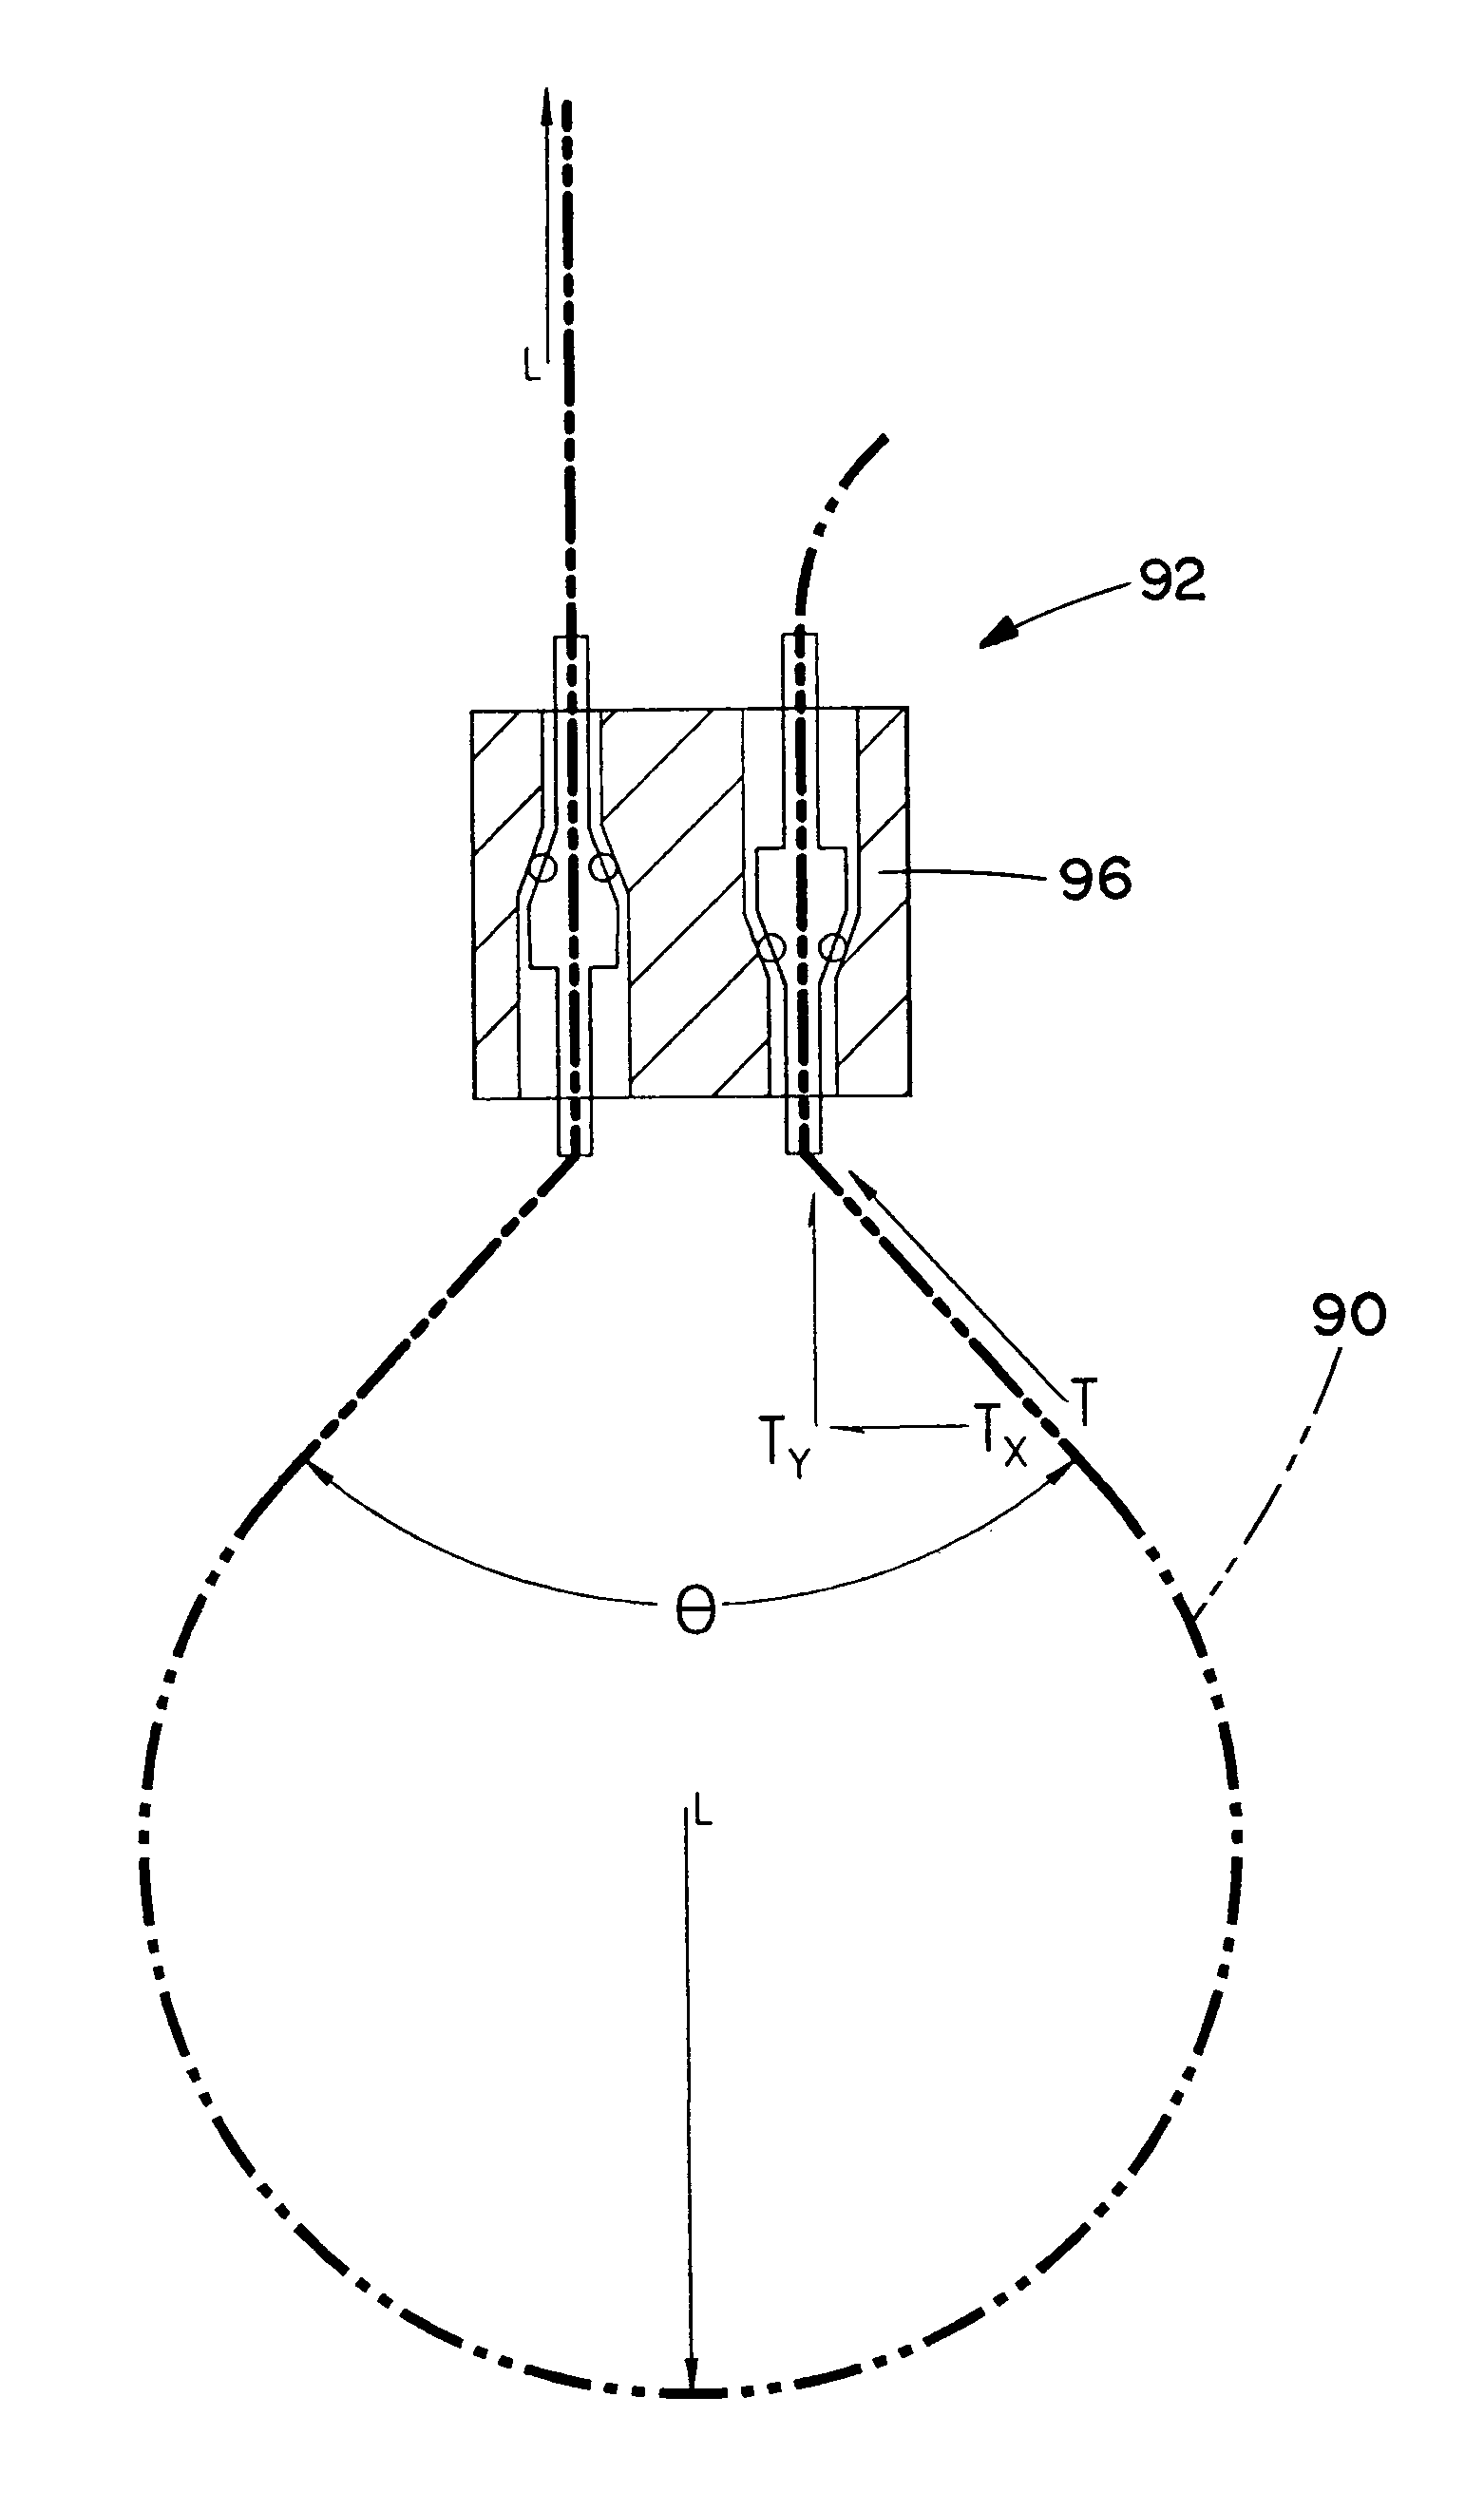 Cable locking device